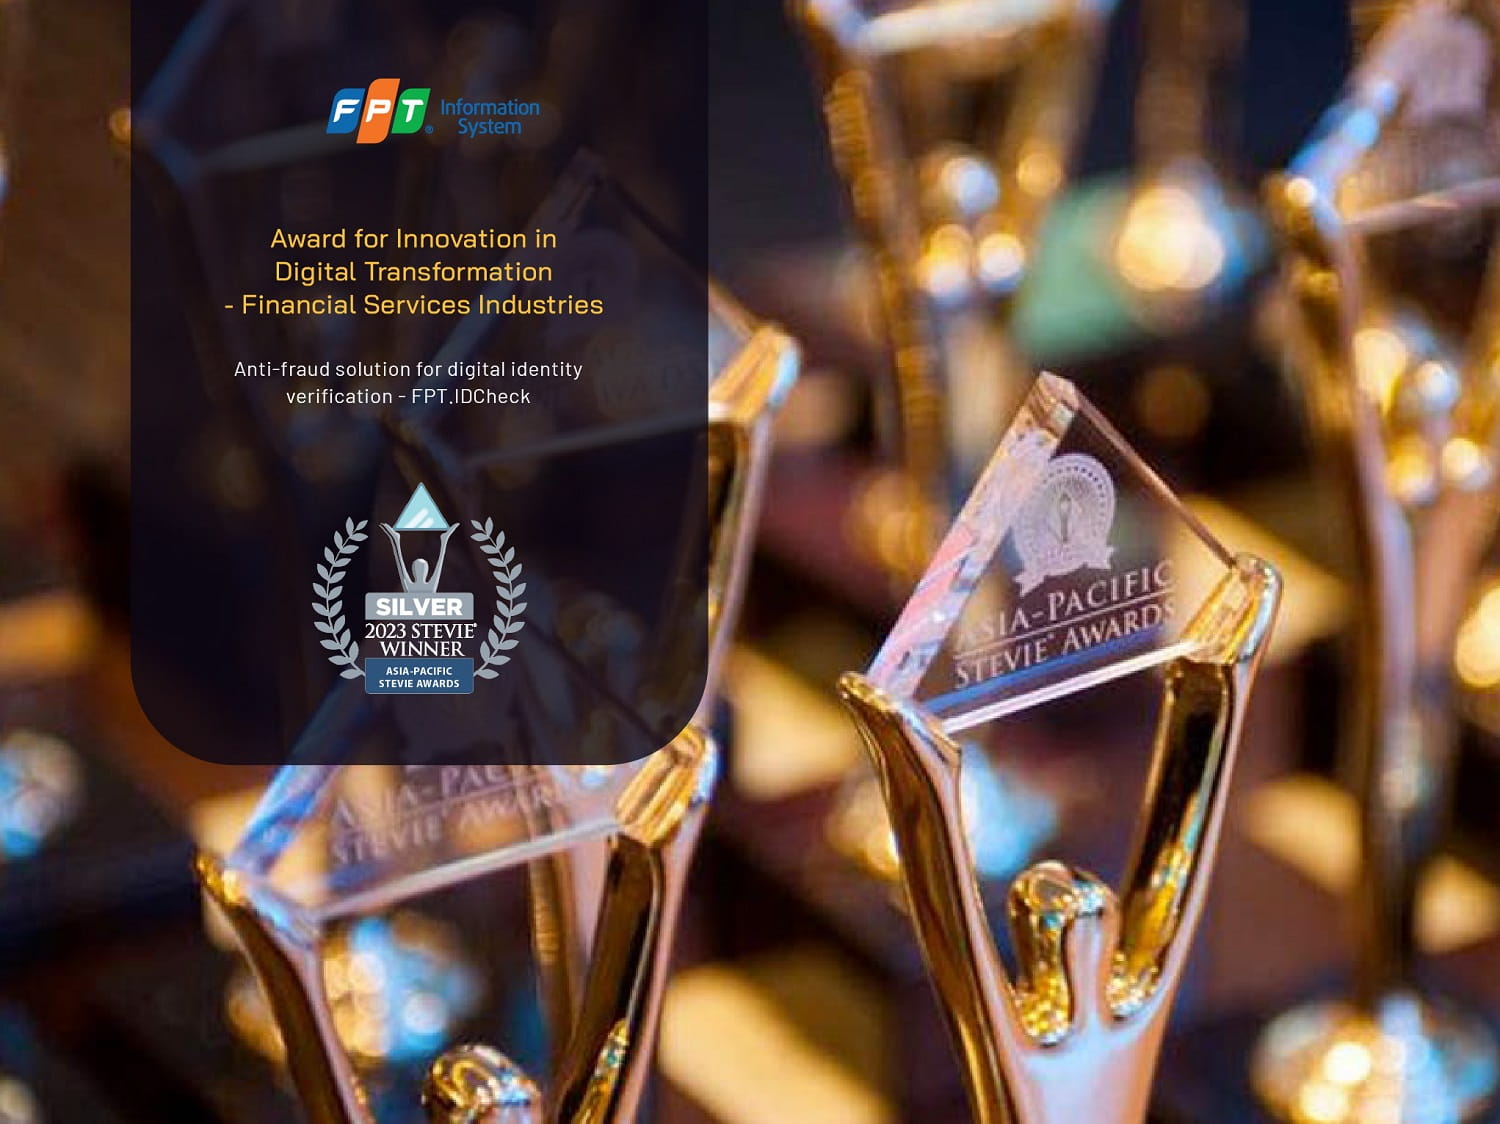 FPT.IDCheck - the digital authentication anti-counterfeiting solution was honored with the Bronze Award in the category of Creativity in Digital Transformation